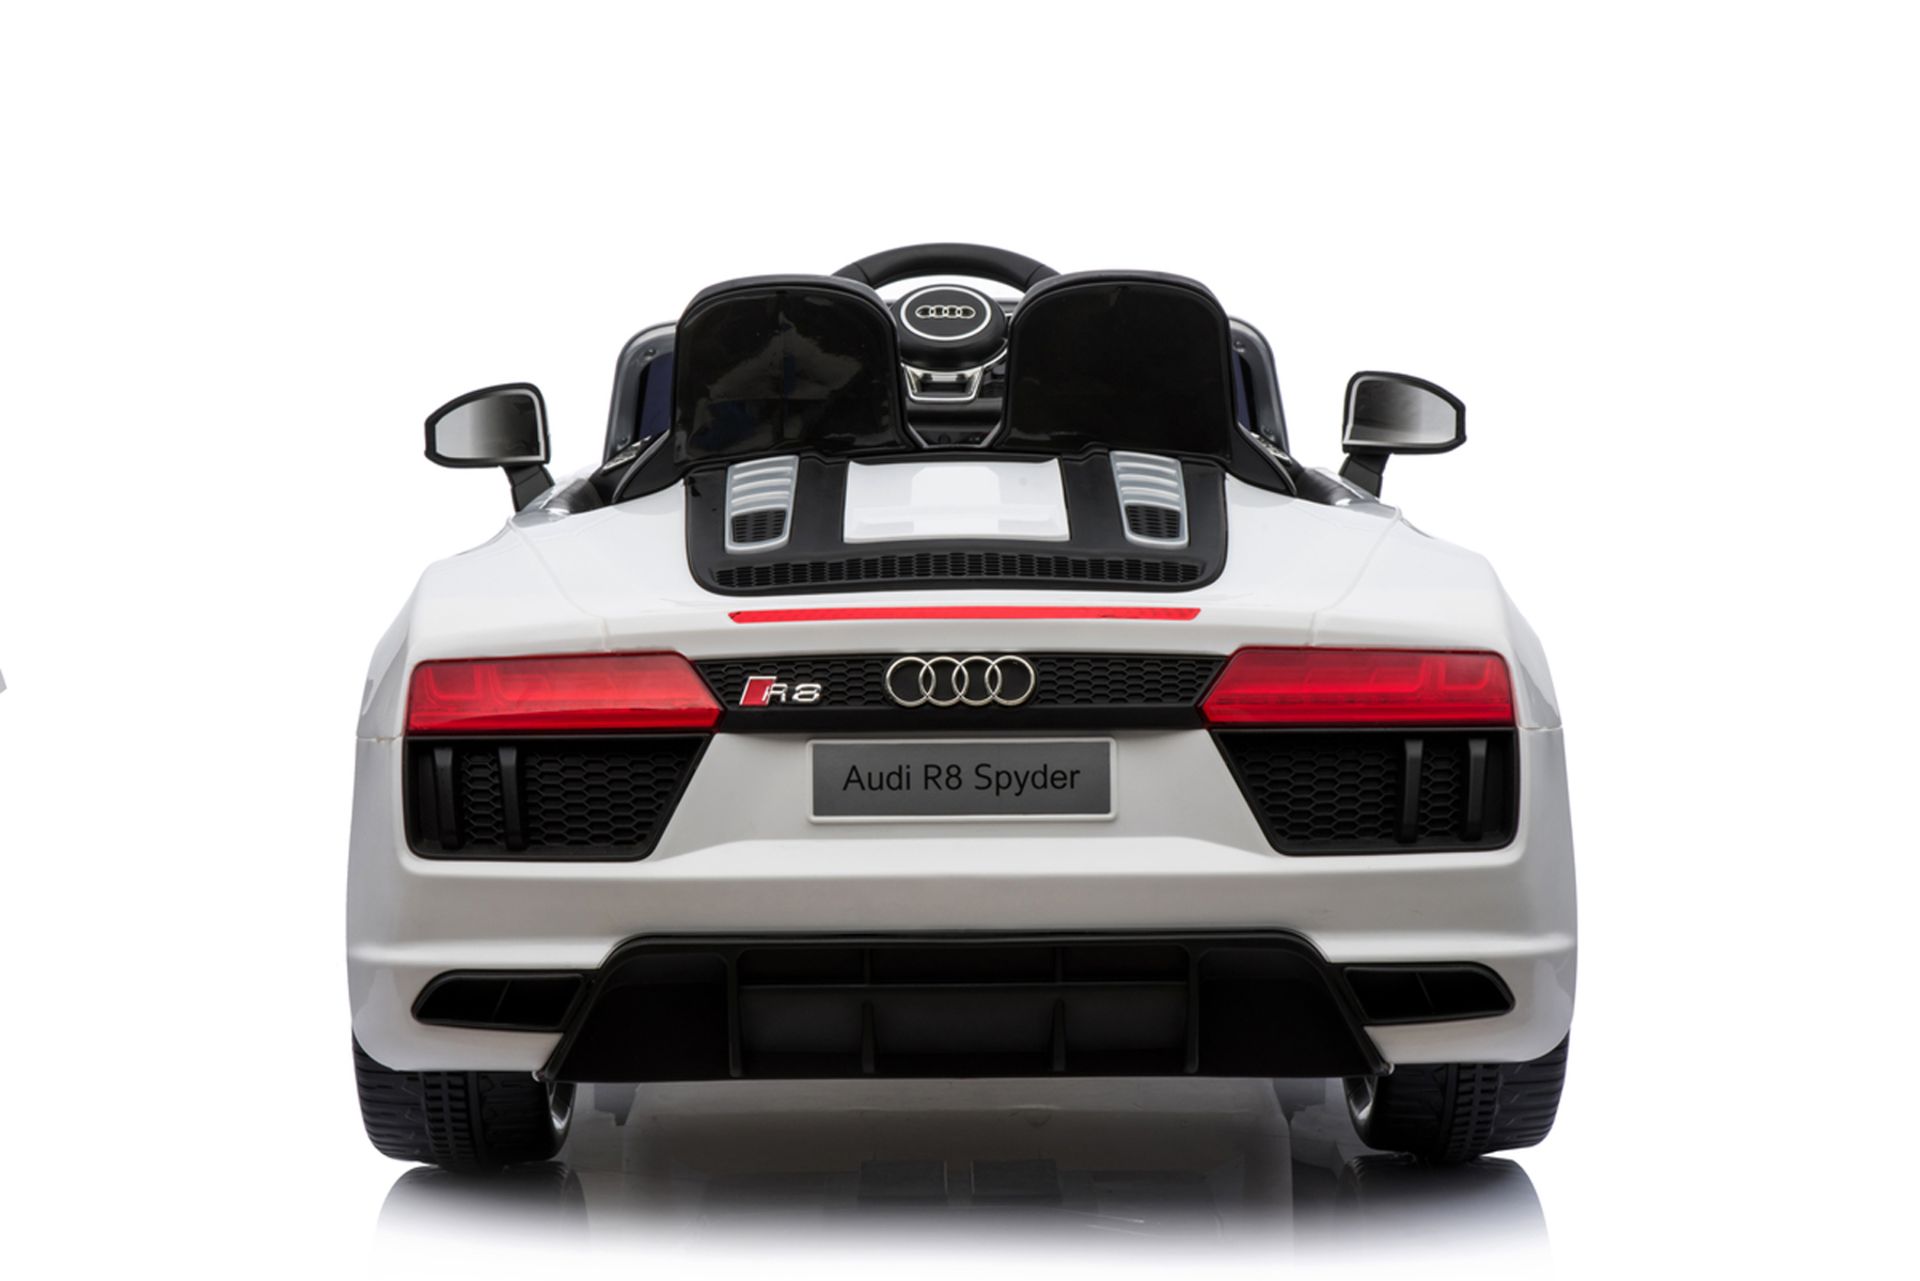 RIDE ON FULLY LICENSED AUDI R8 SPYDER 6V WITH PARENTAL REMOTE CONTROL - WHITE - Image 8 of 8